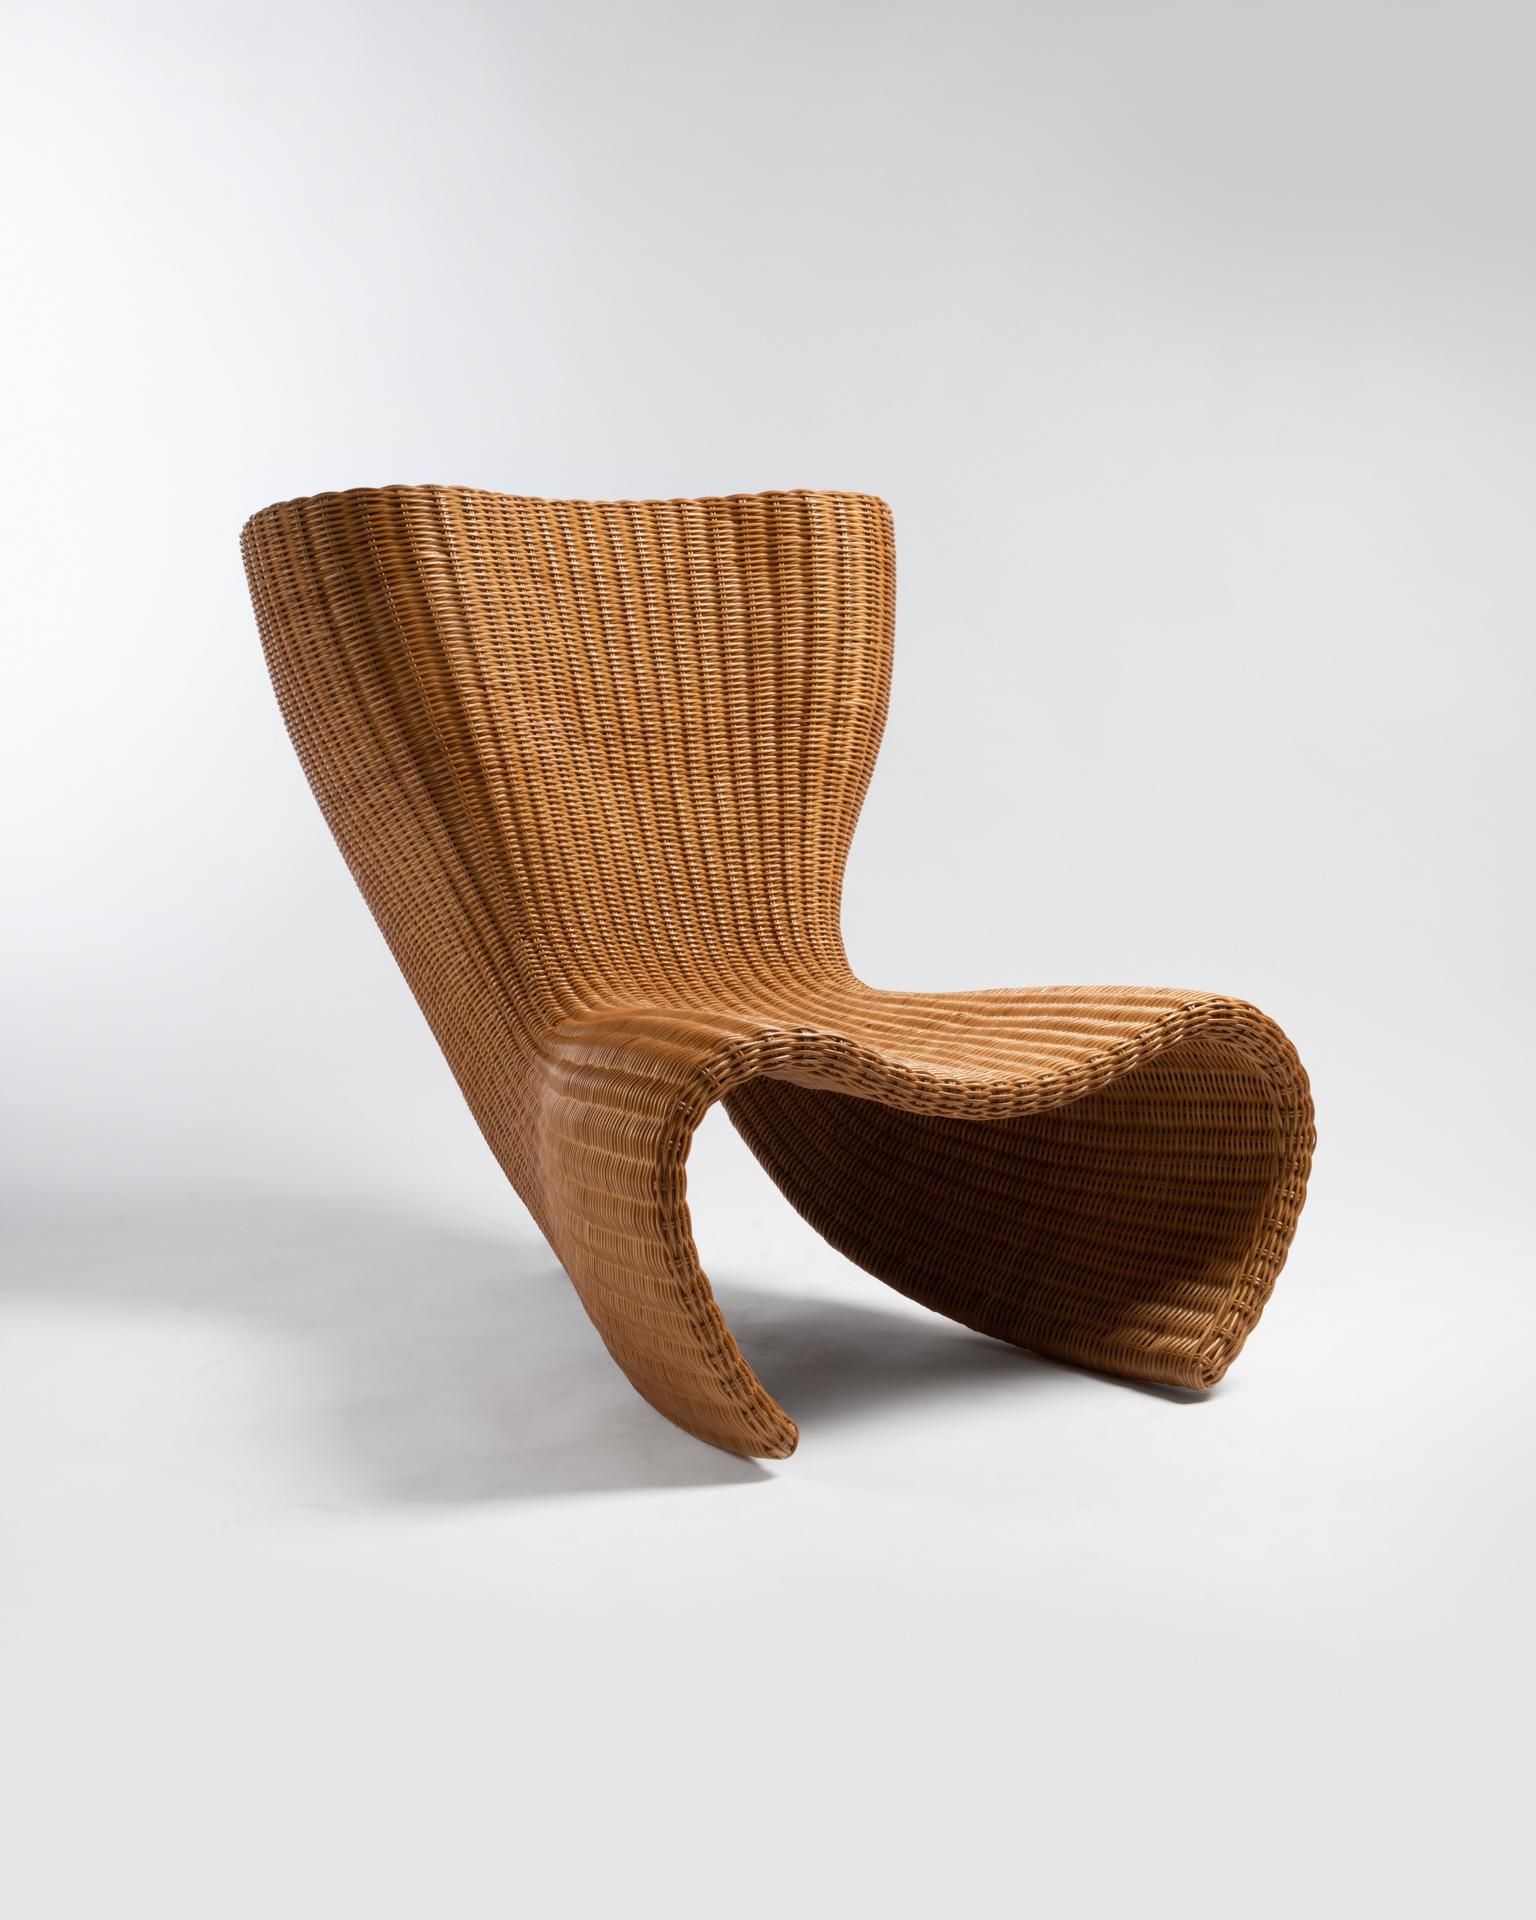 In 1990 and with the help of a Wicker Factory in Thailand, Marc Newson Started developing the wicker version of the Felt Chair.
The challenge for this design was covering the chair in woven rattan, on the outside as well as on the inside of the